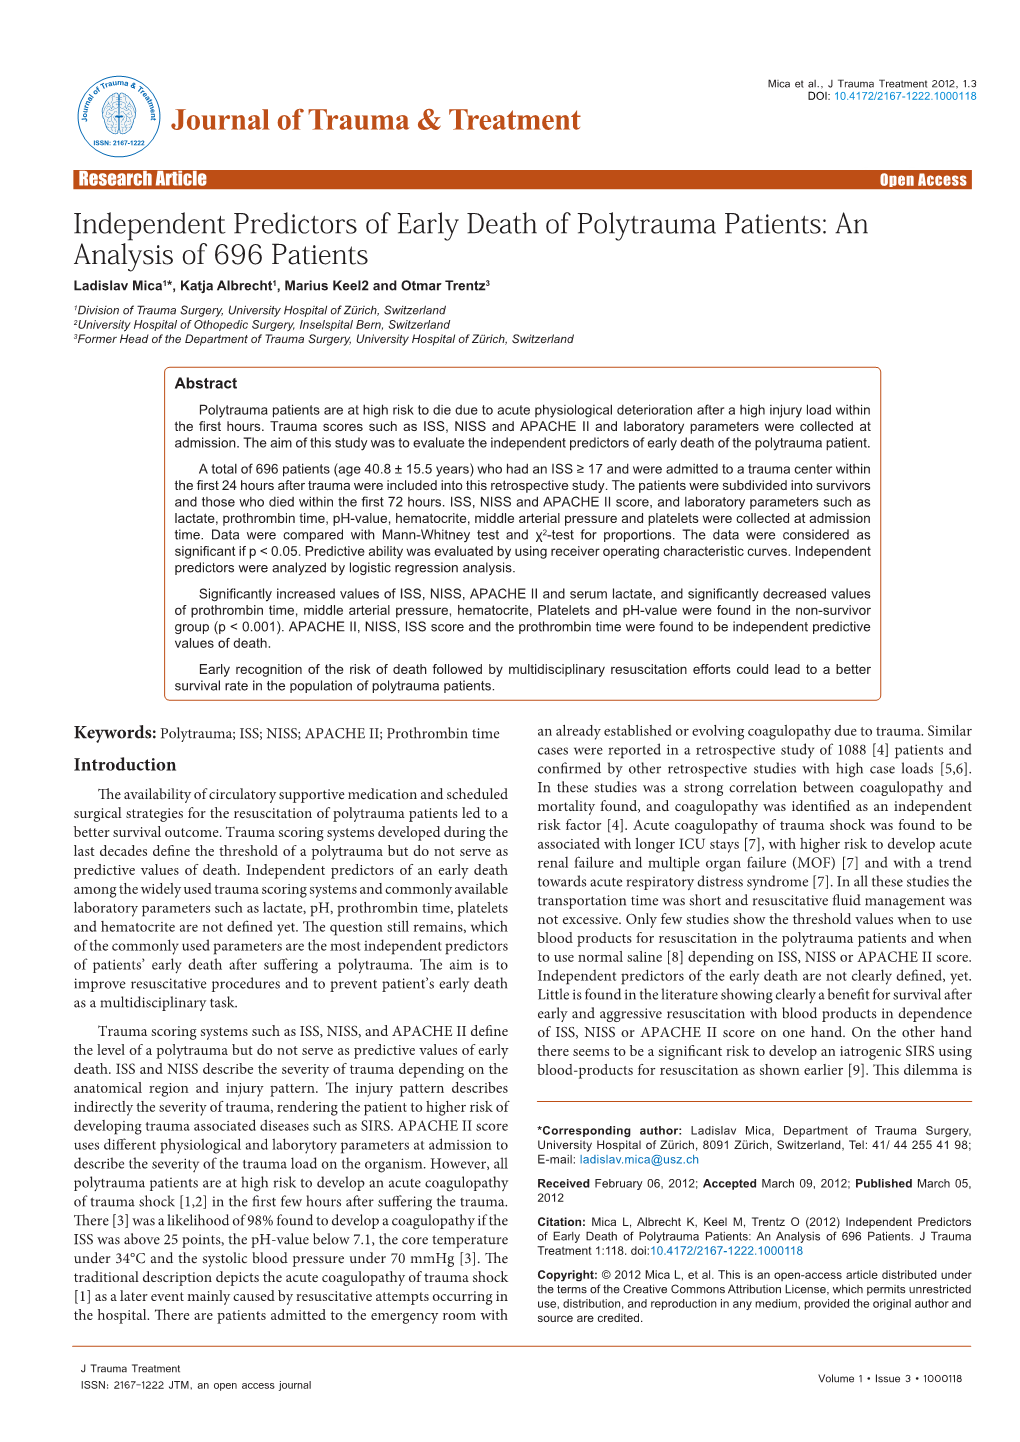 Independent Predictors of Early Death Of